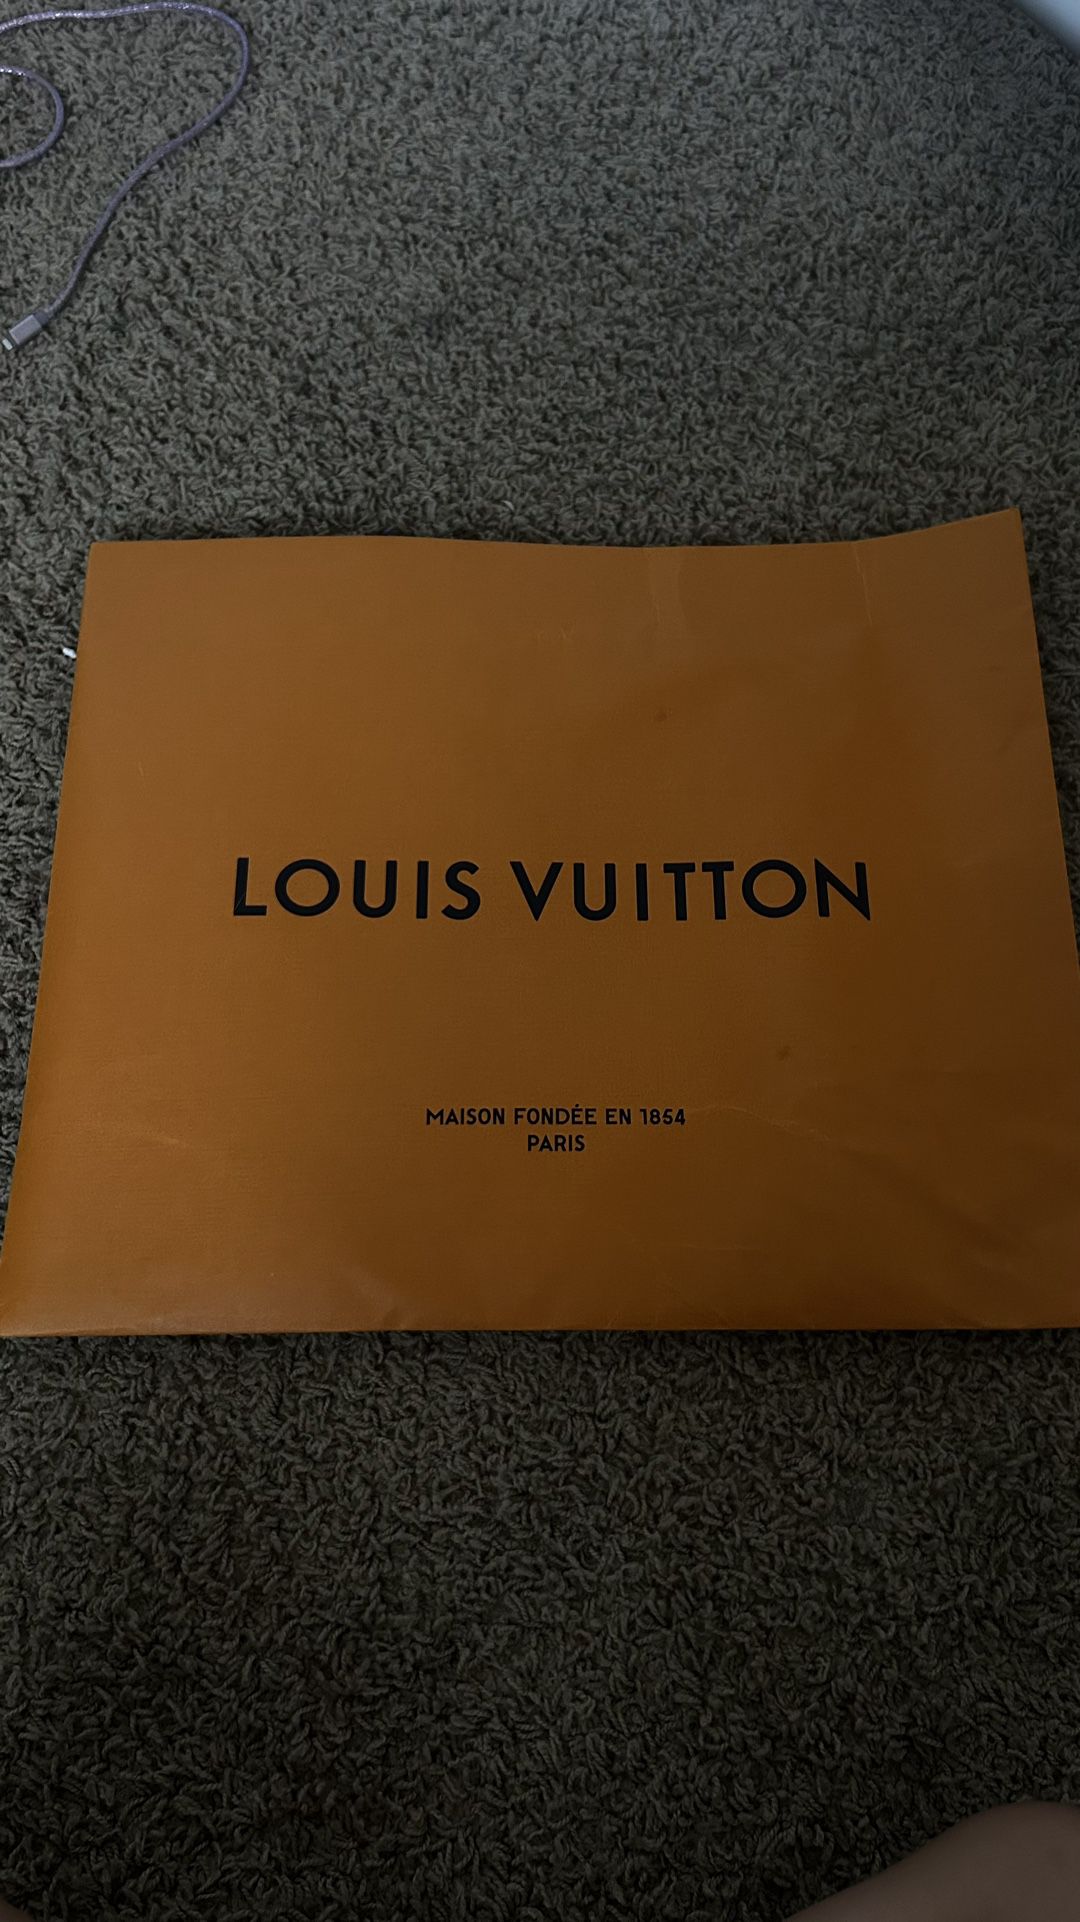 real louis vuitton bags